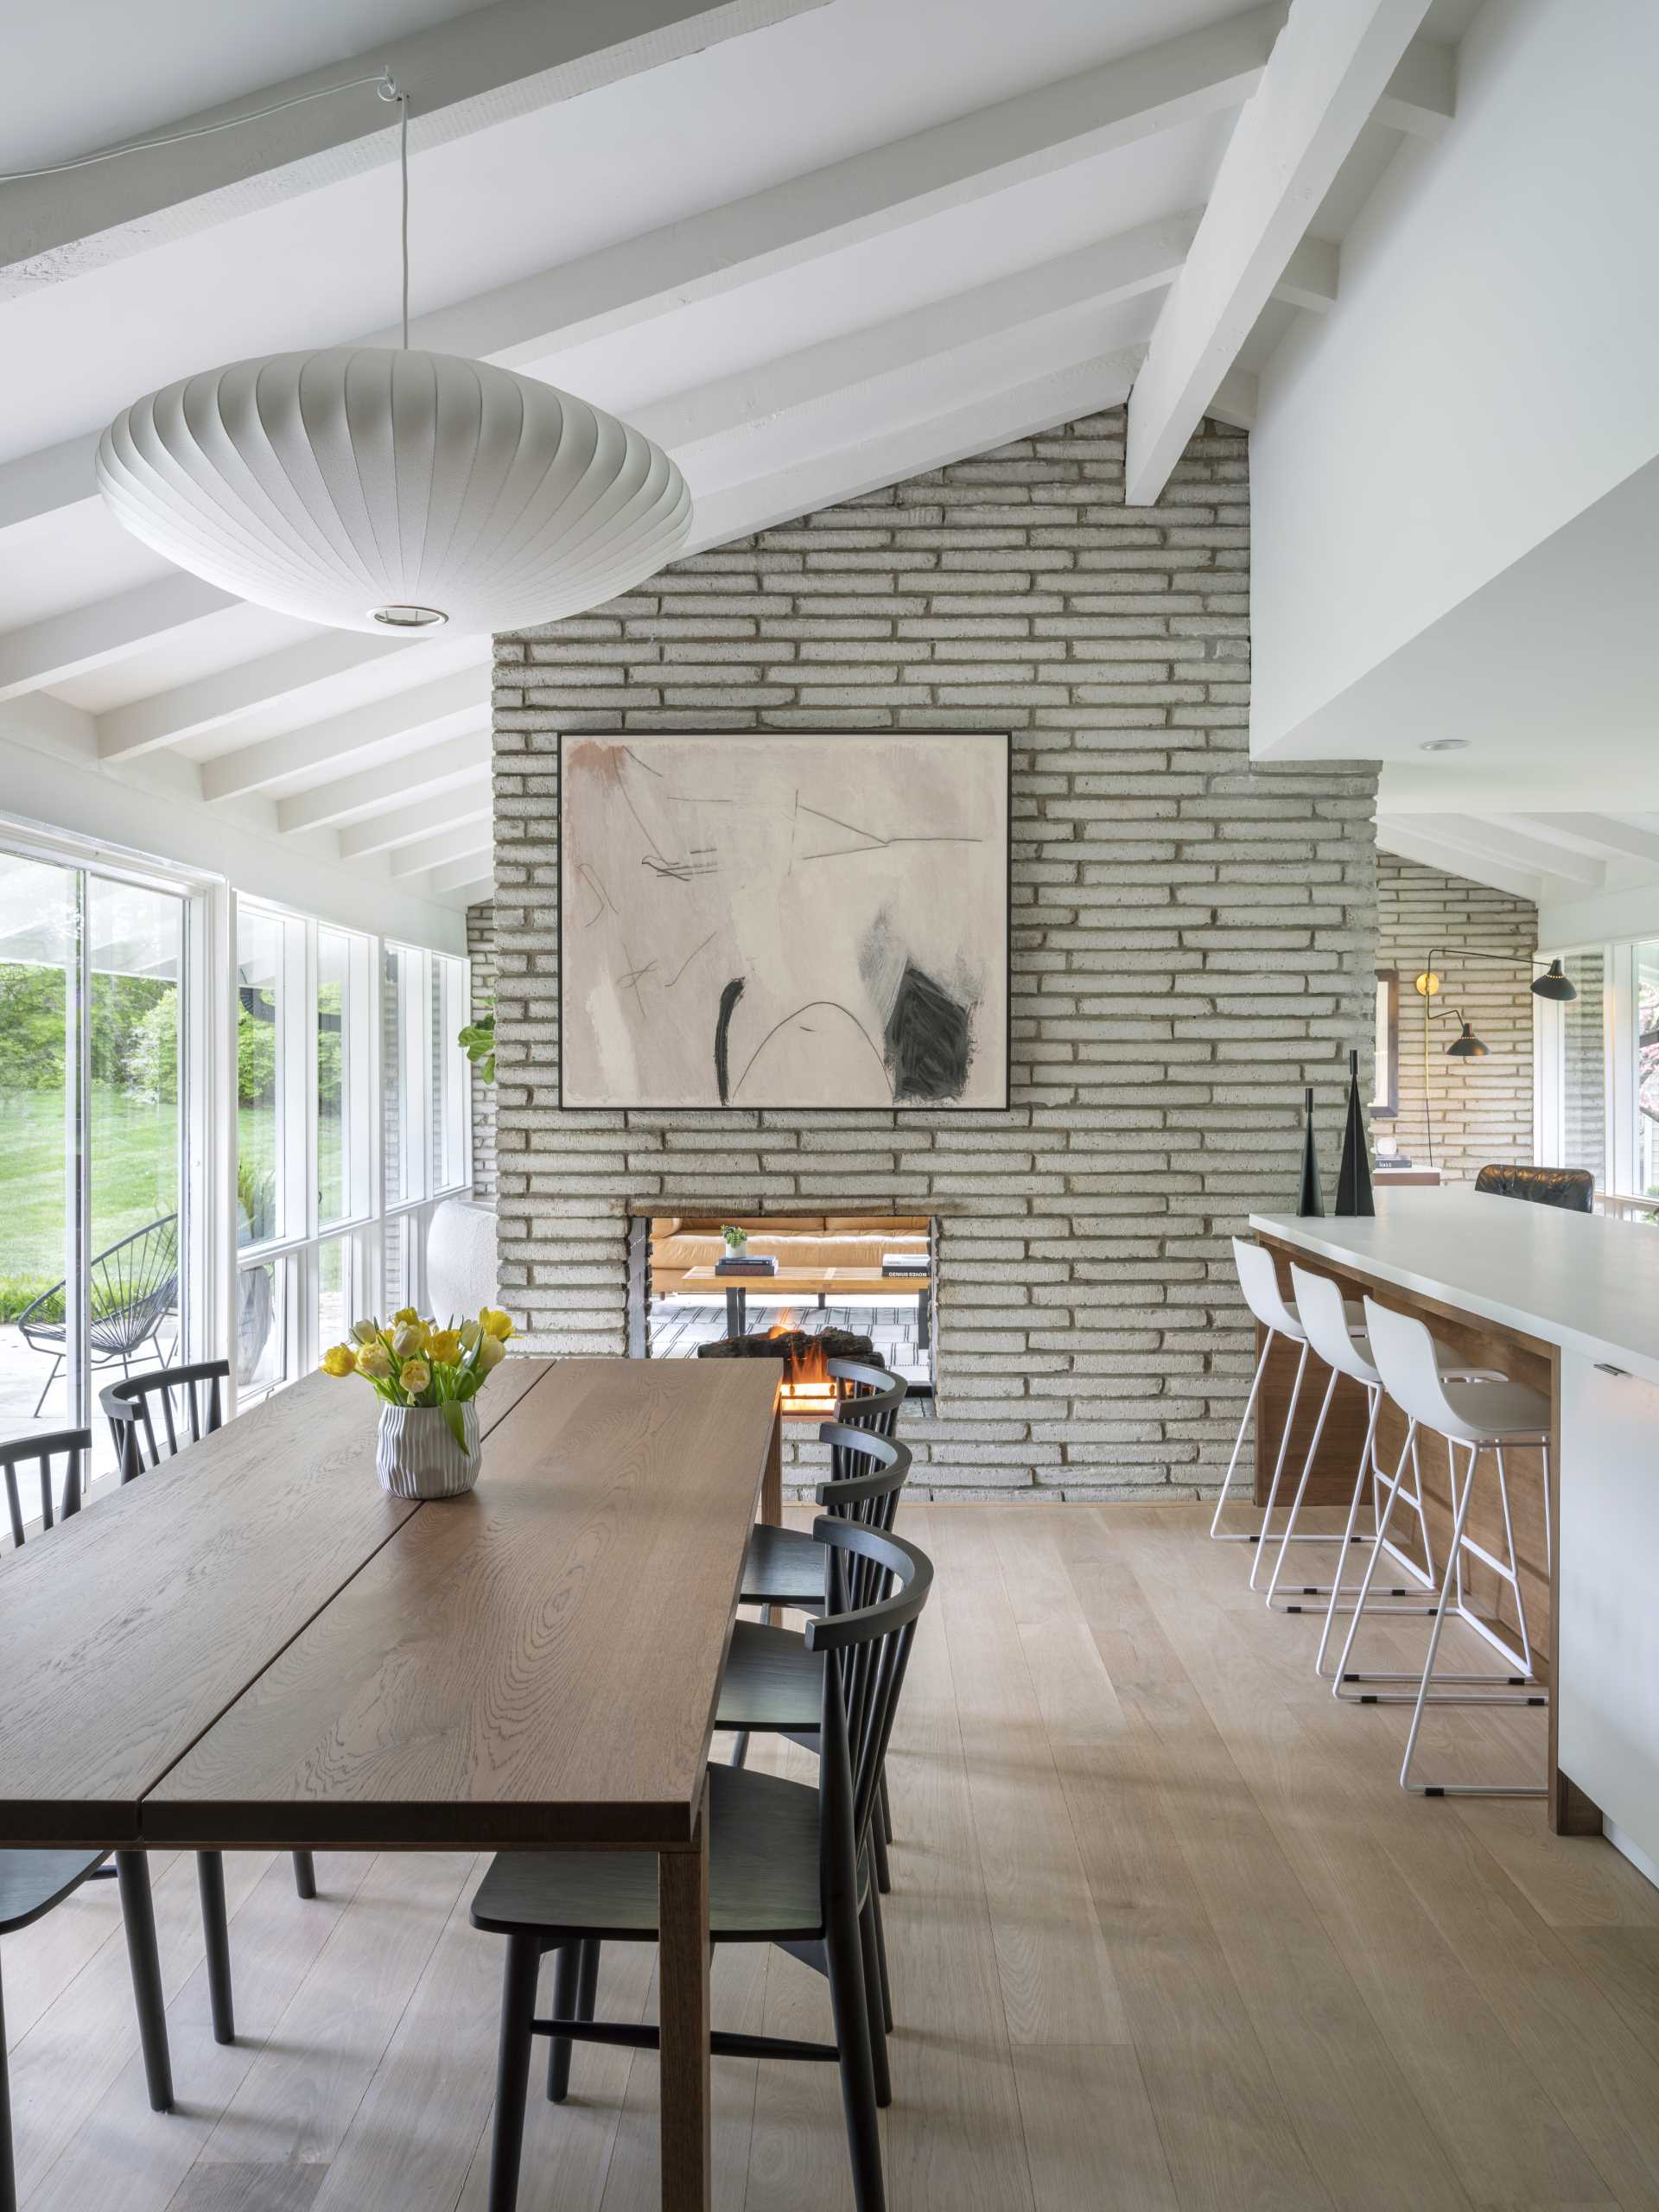 An updated mid-century modern house that kept a double-sided brick fireplace that can be enjoyed from the dining room and living room.